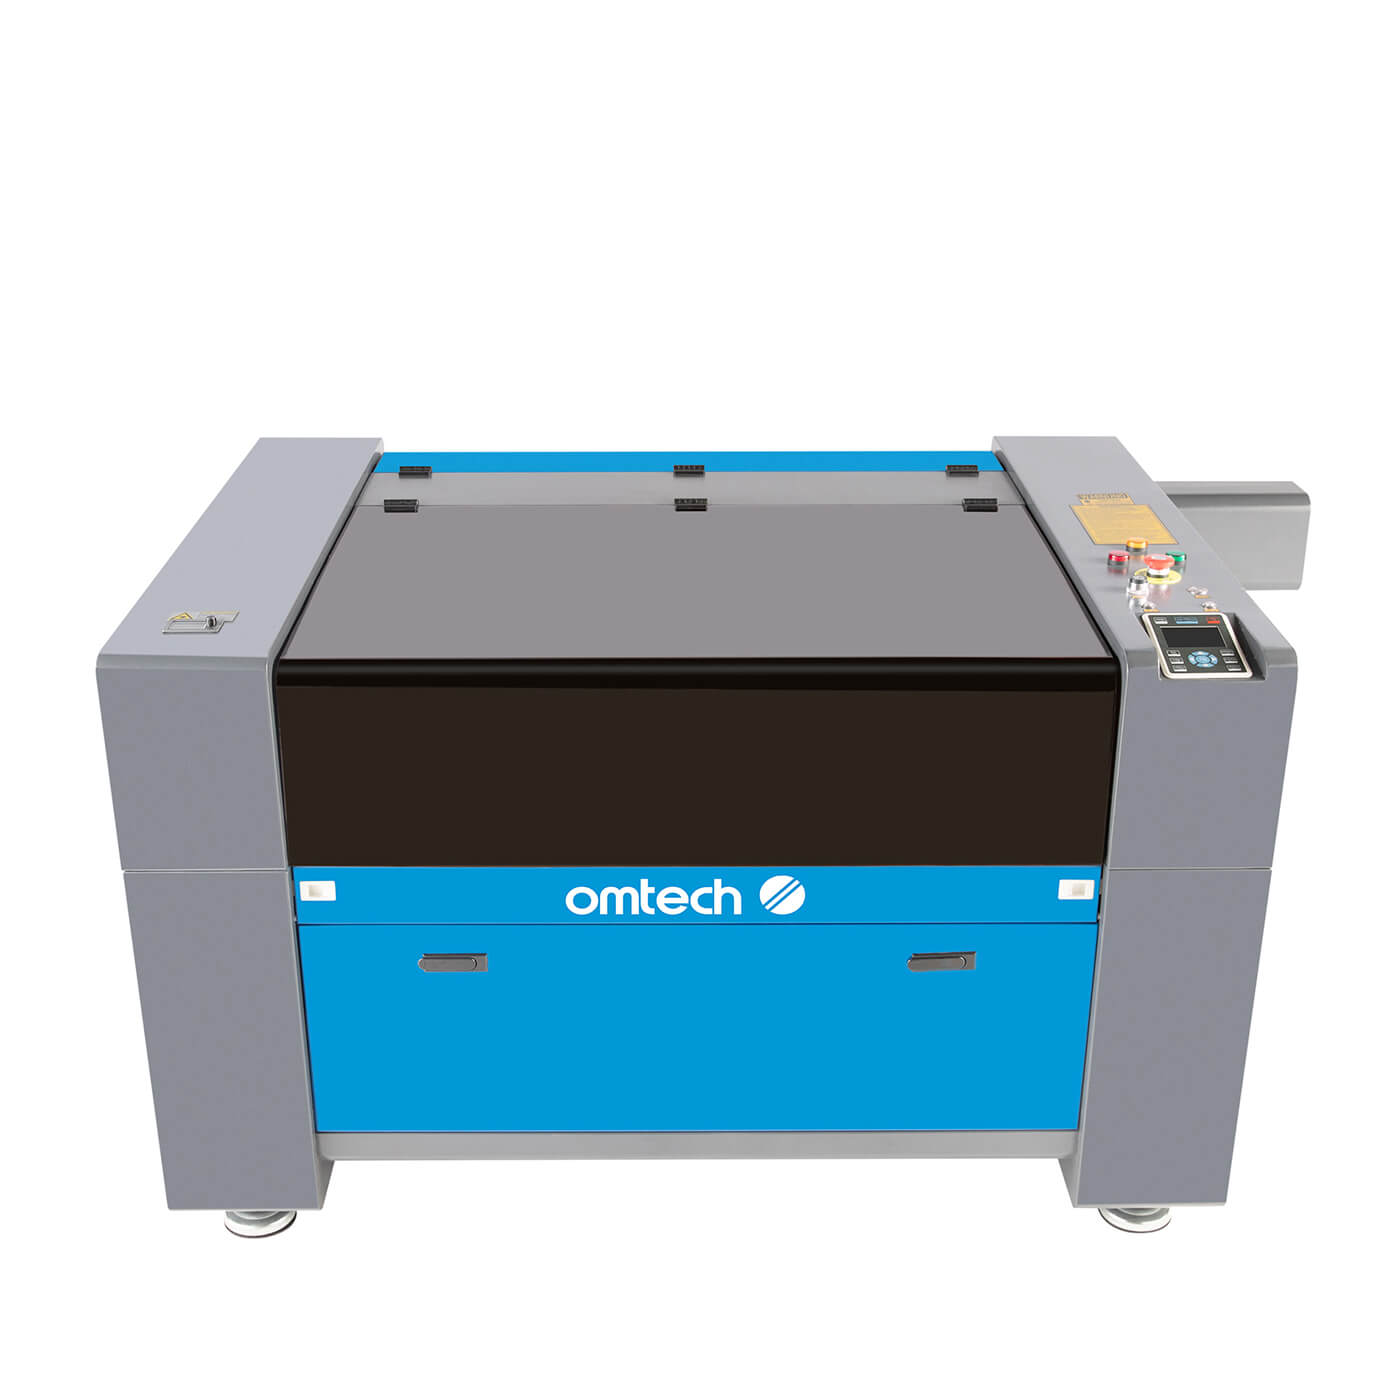 100W CO2 Laser Engraver Cutter Machine with Autofocus - OMTech